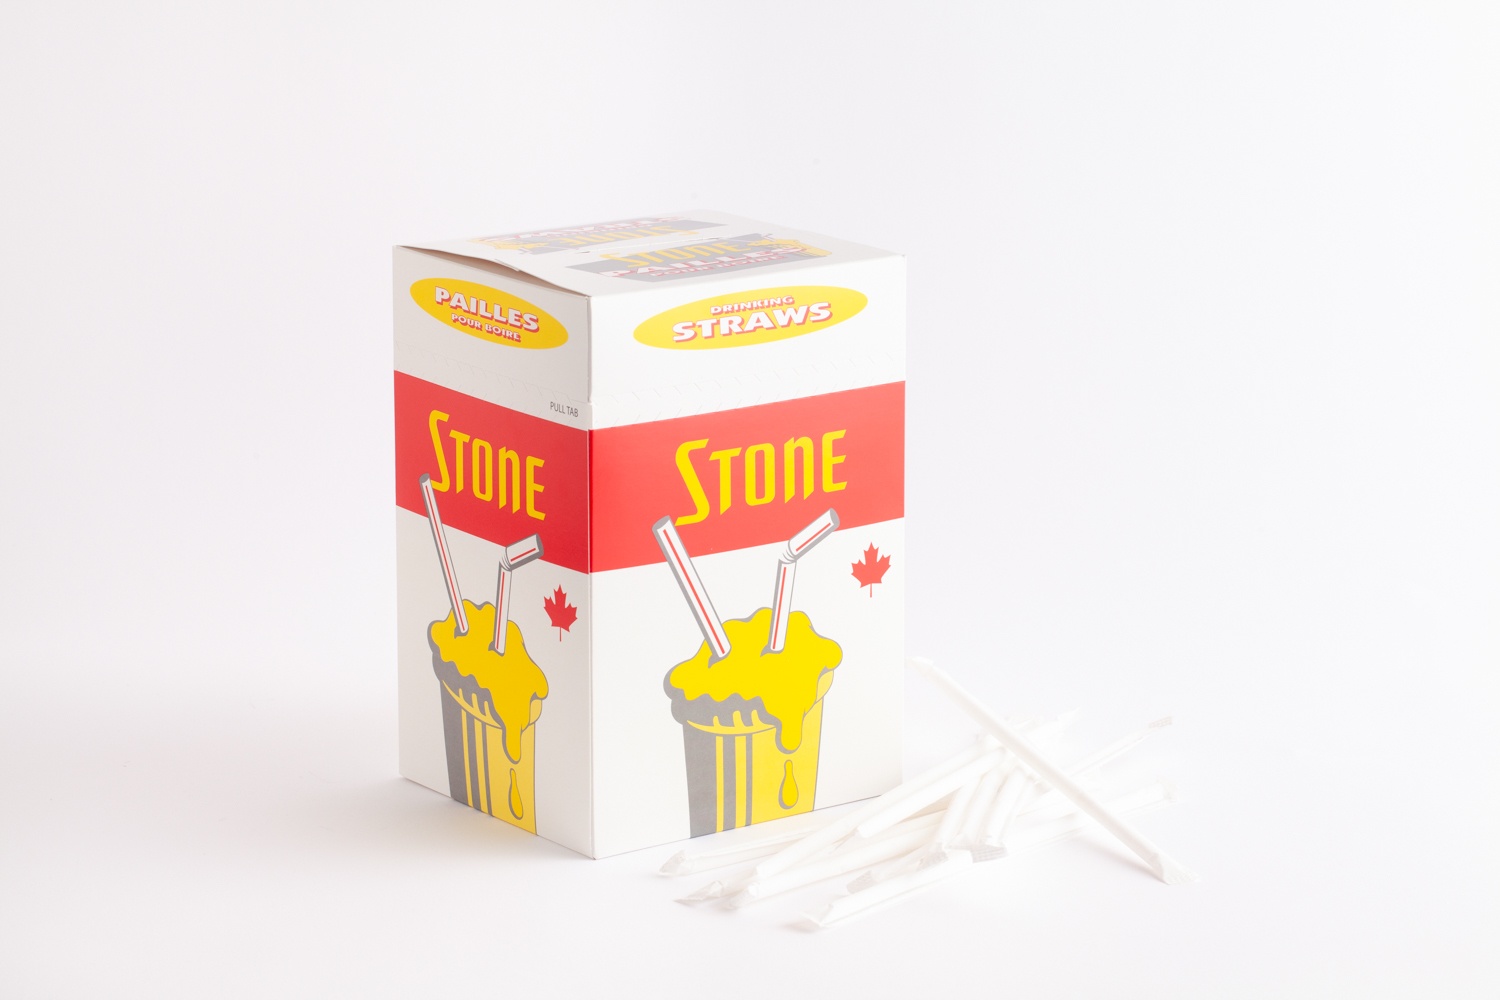 isolated product shot - stone straws box red